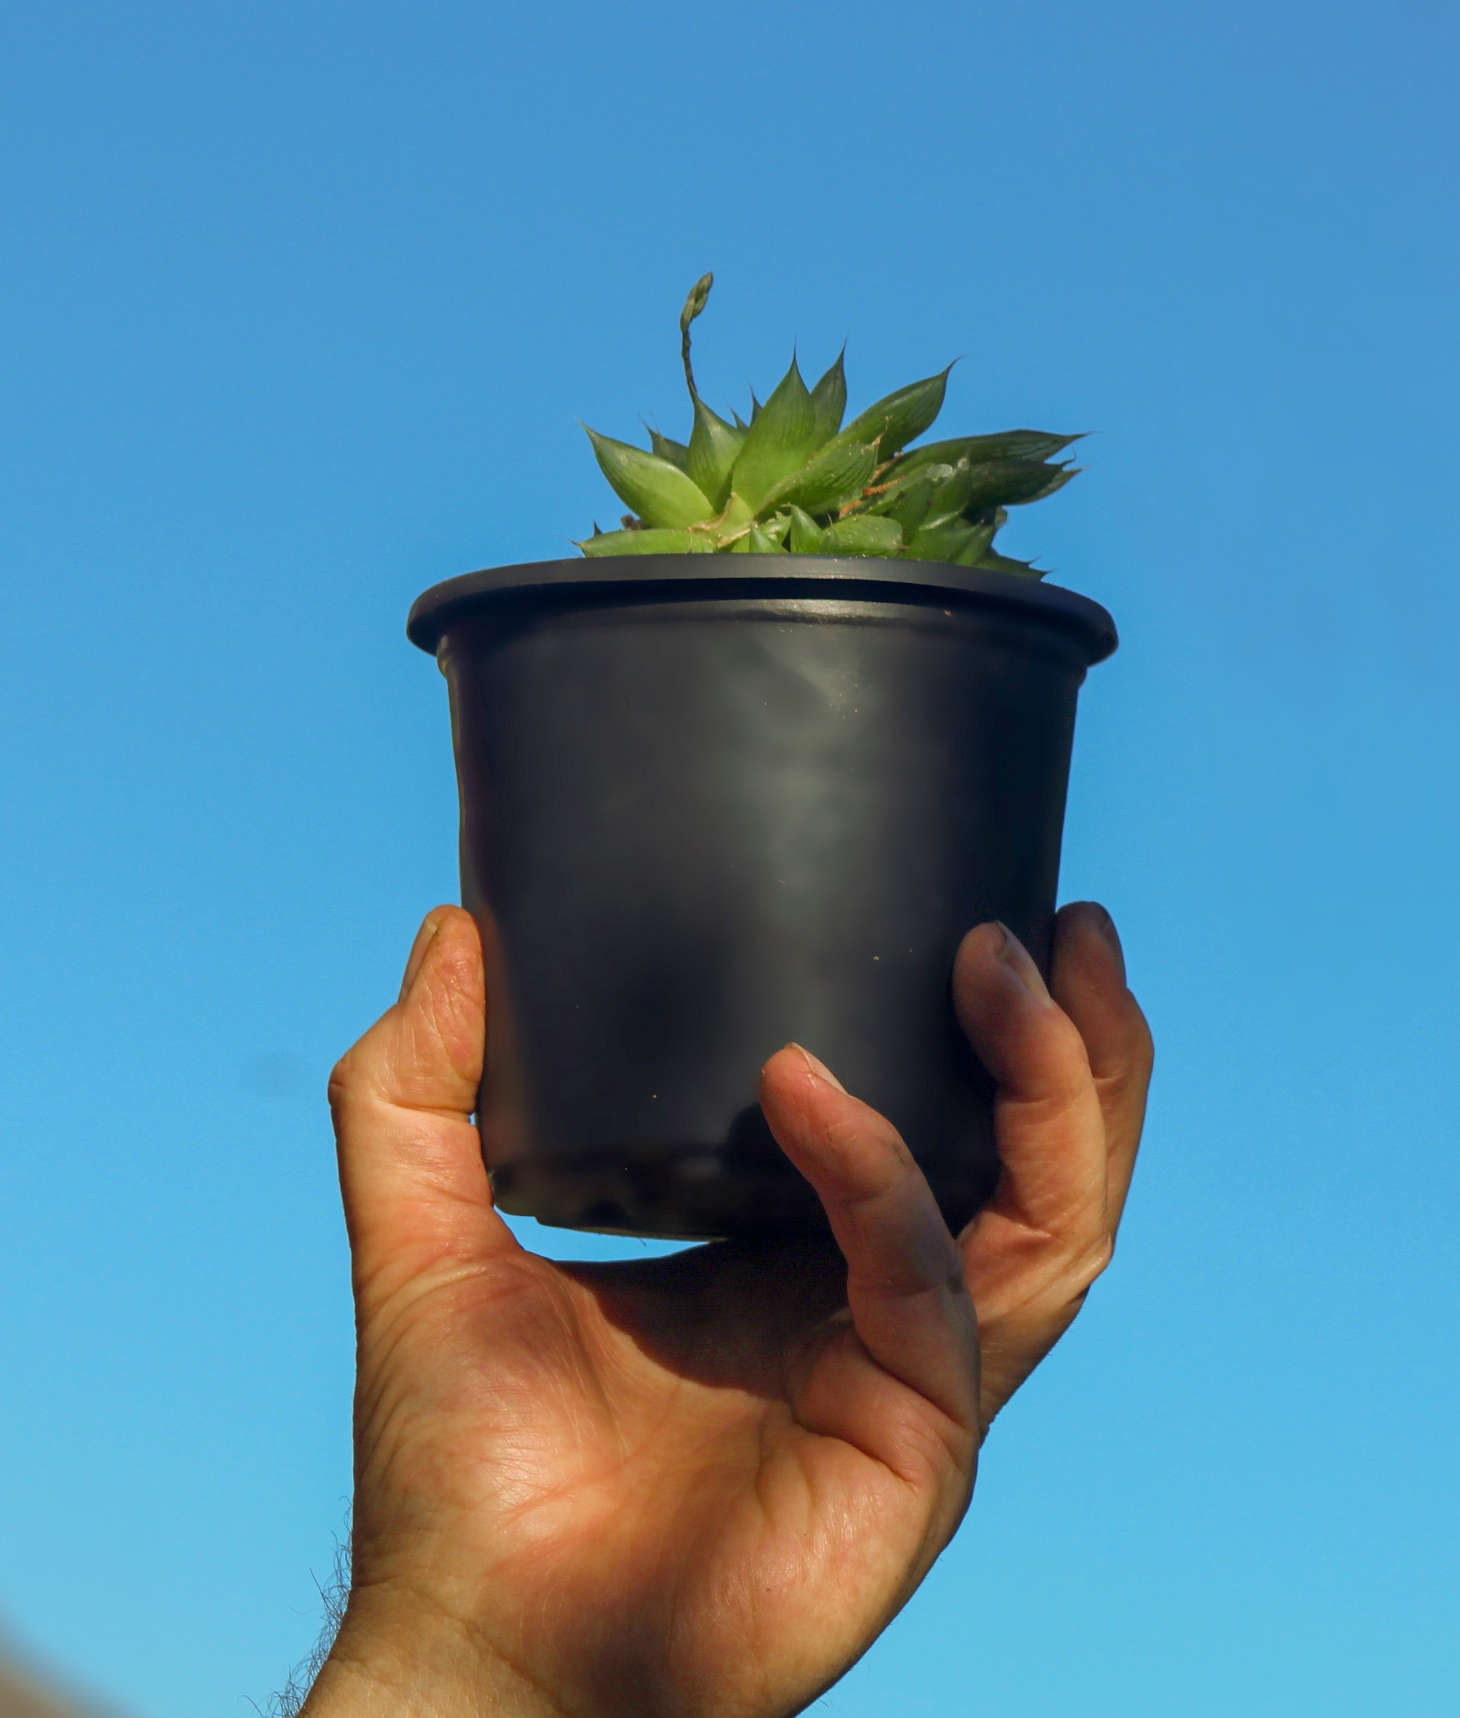 holding a potted cactus